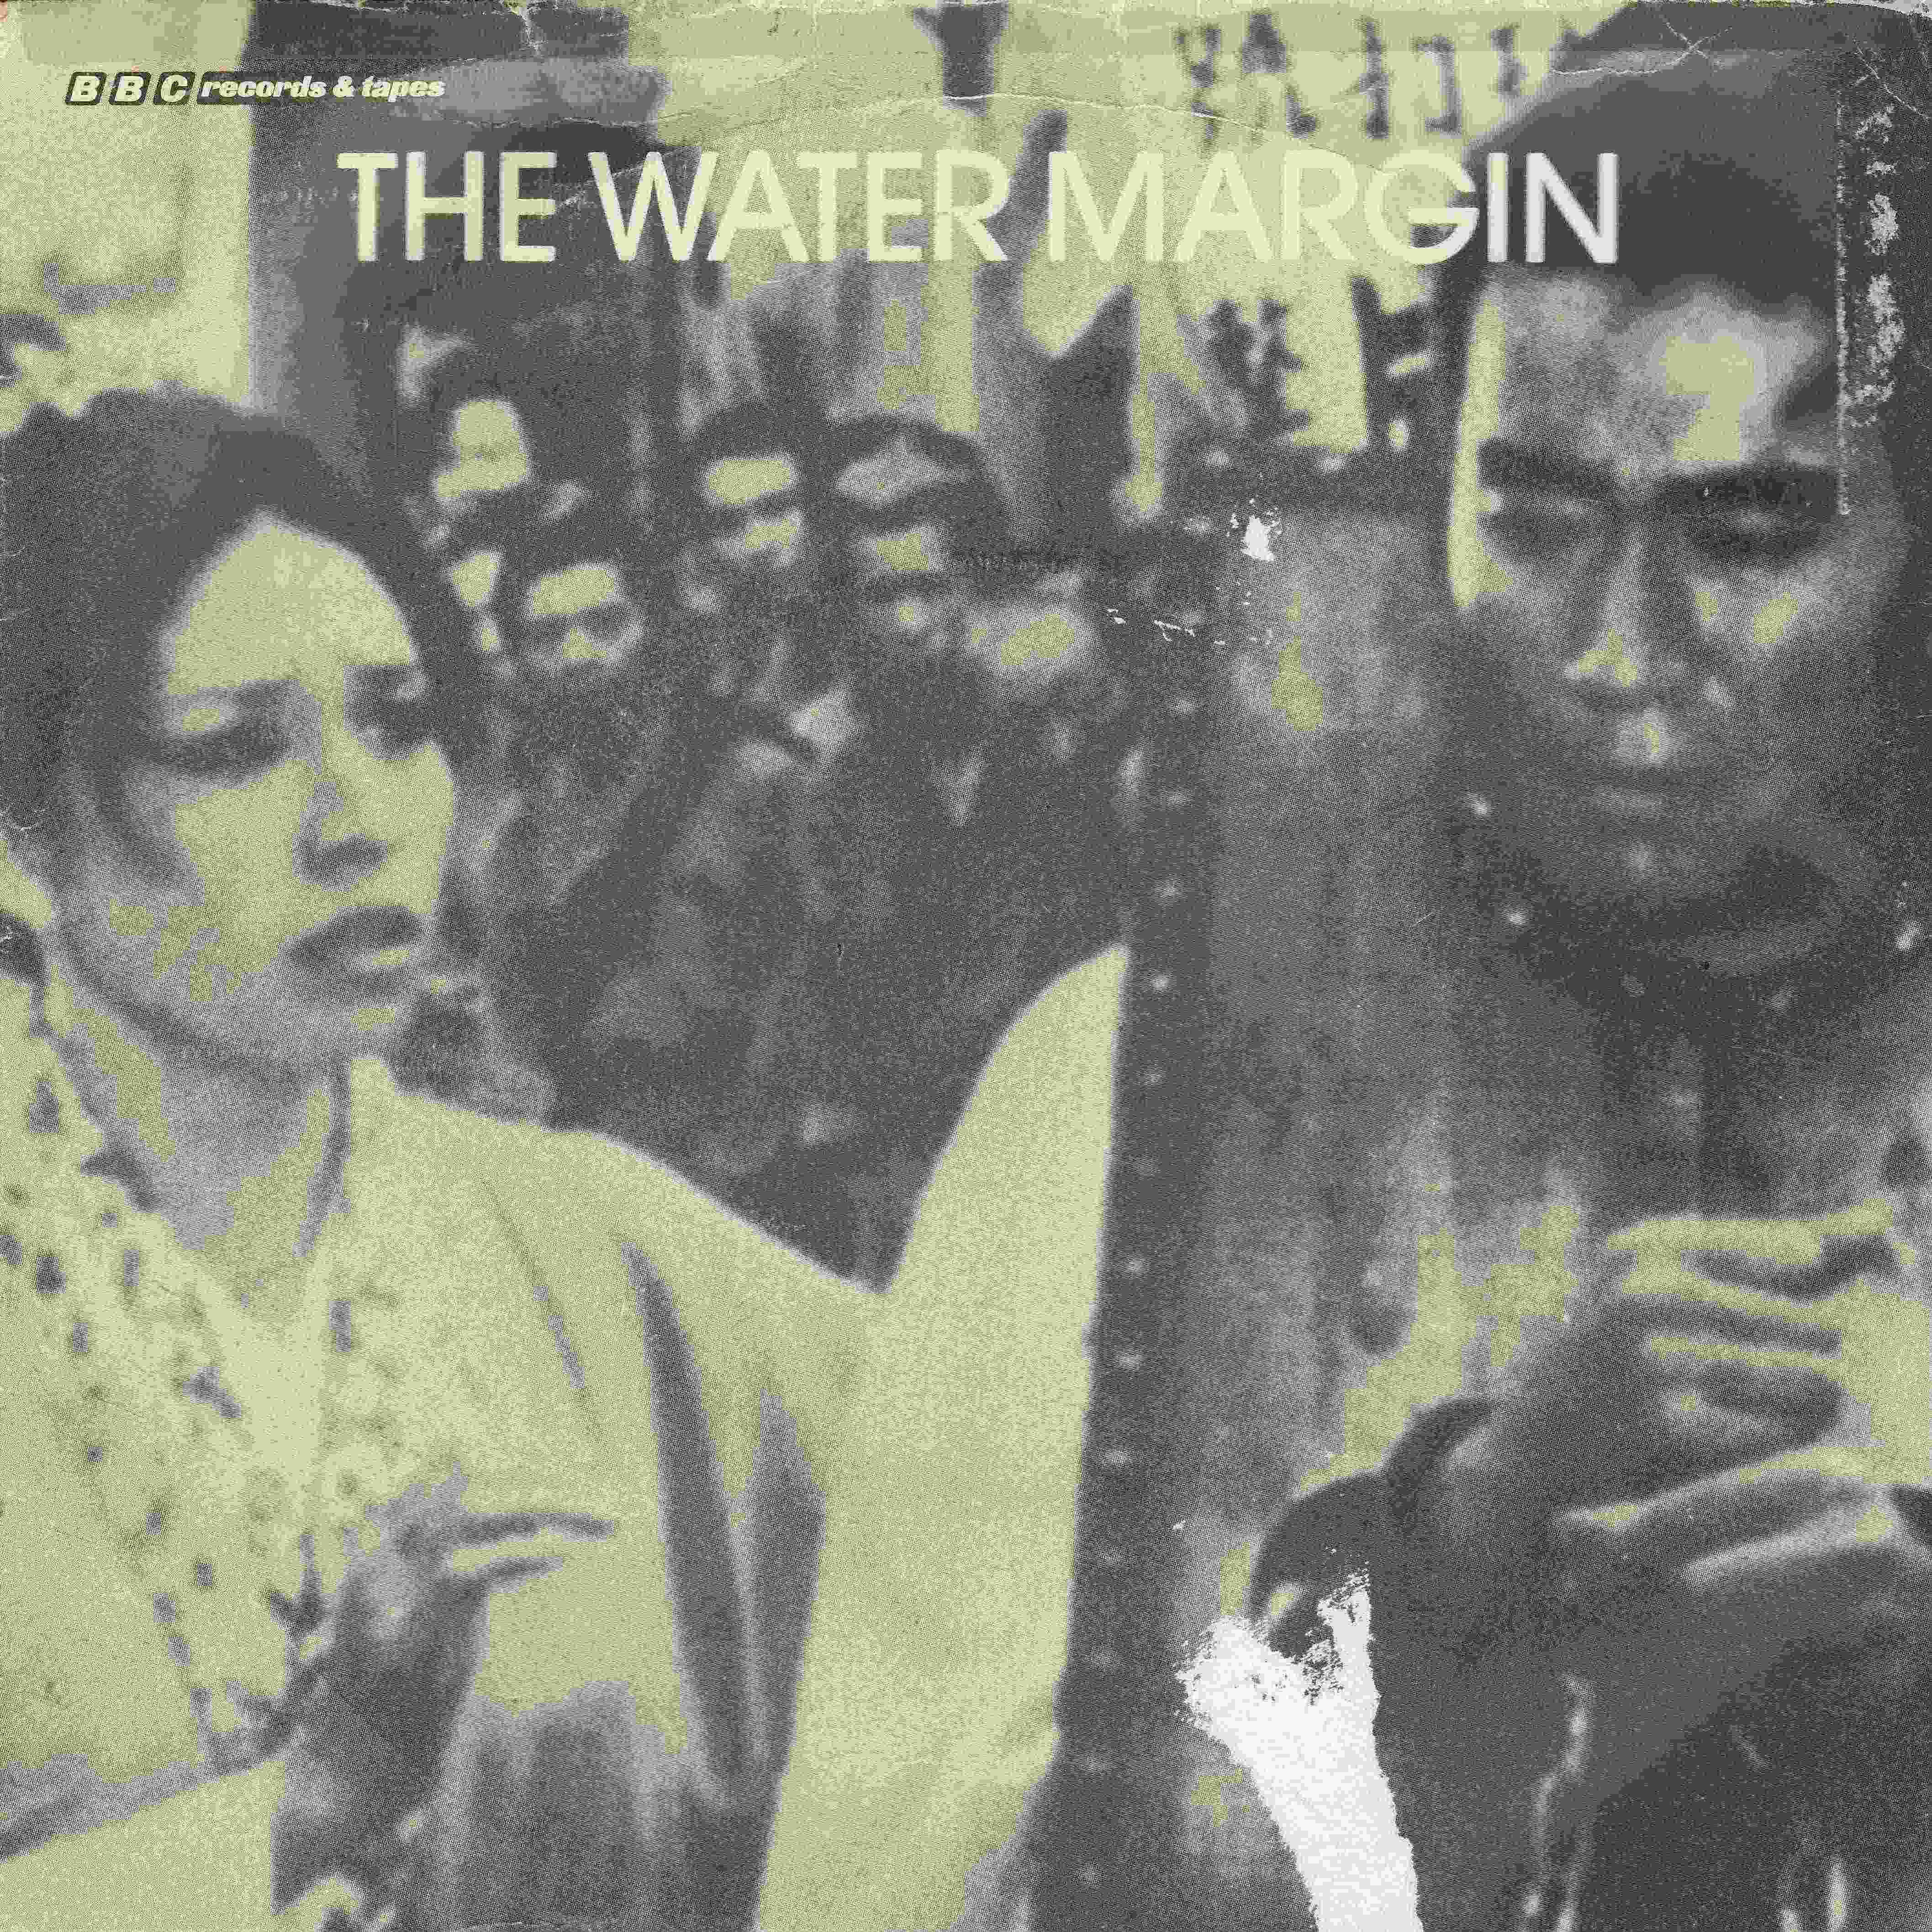 Picture of RESL 50 The water margin by artist Sato from the BBC records and Tapes library